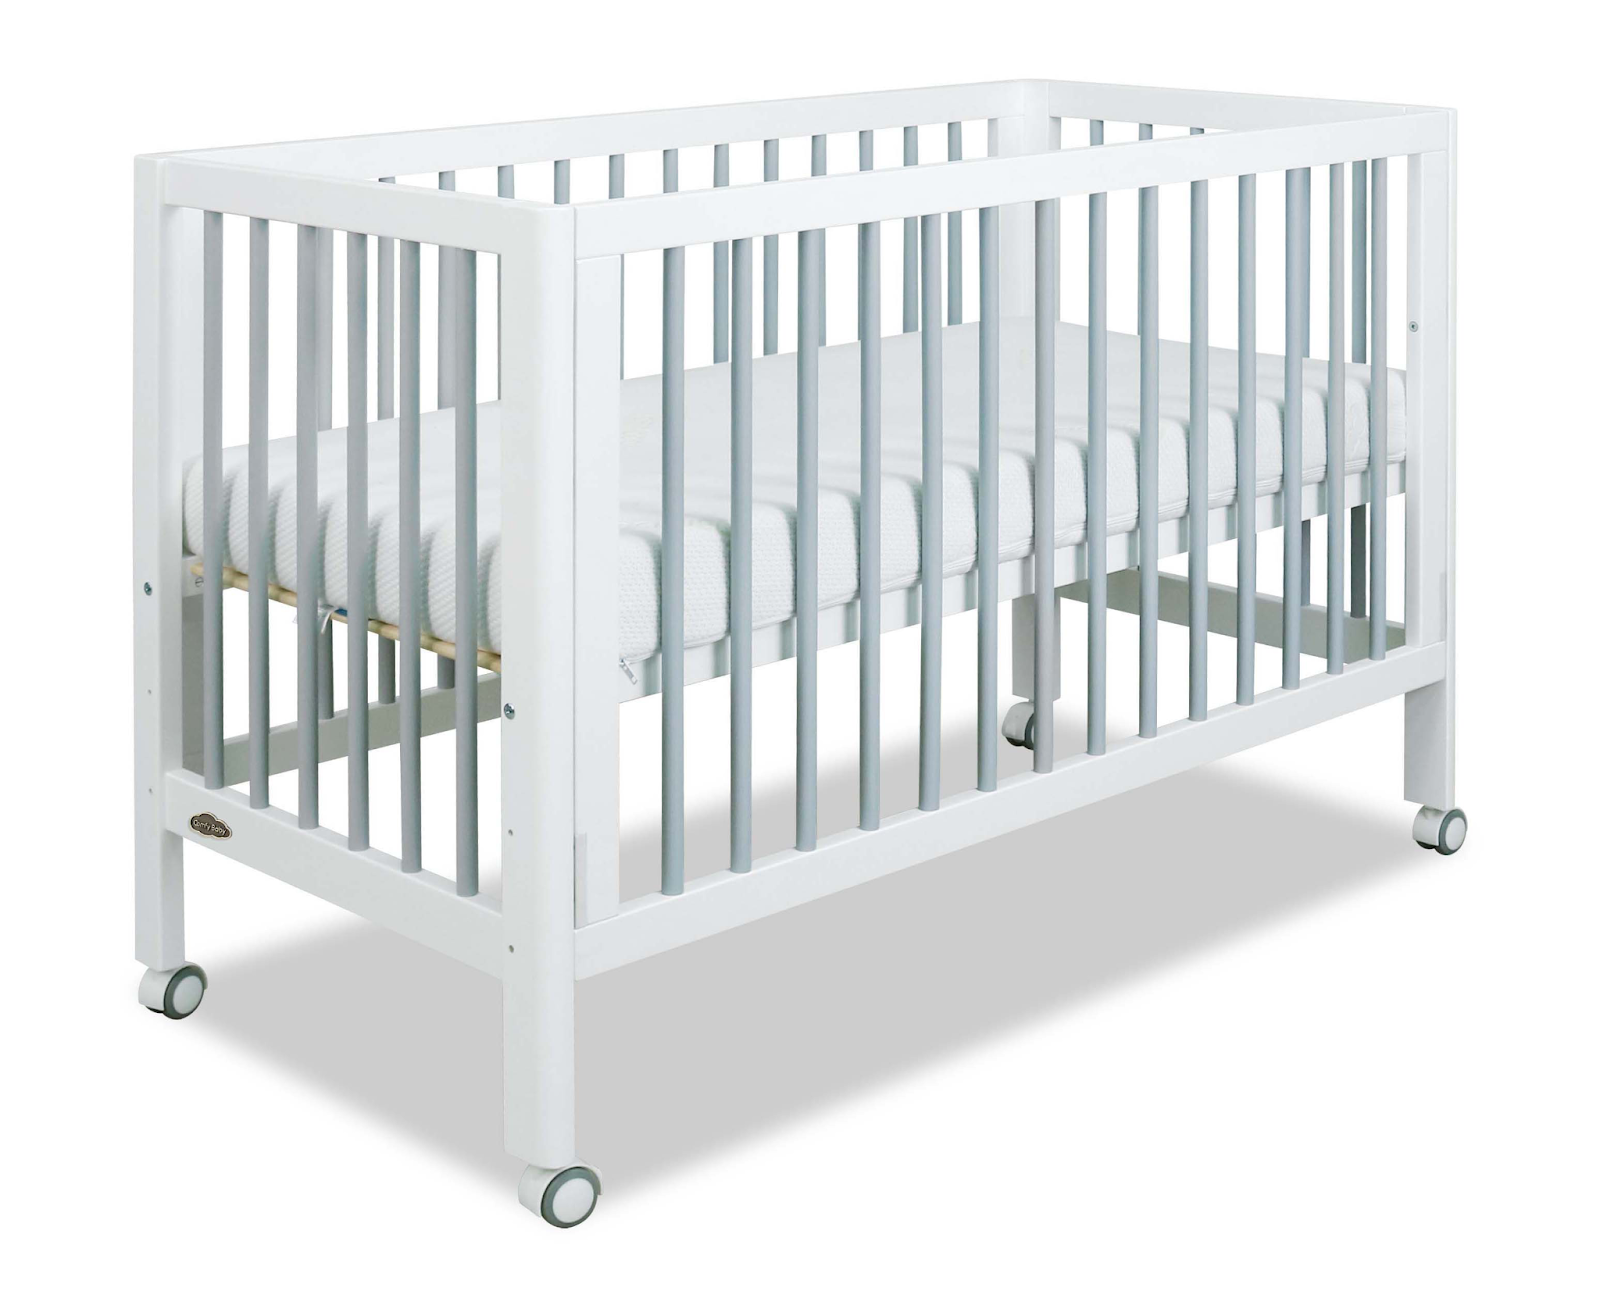 Baby Cot Malaysia